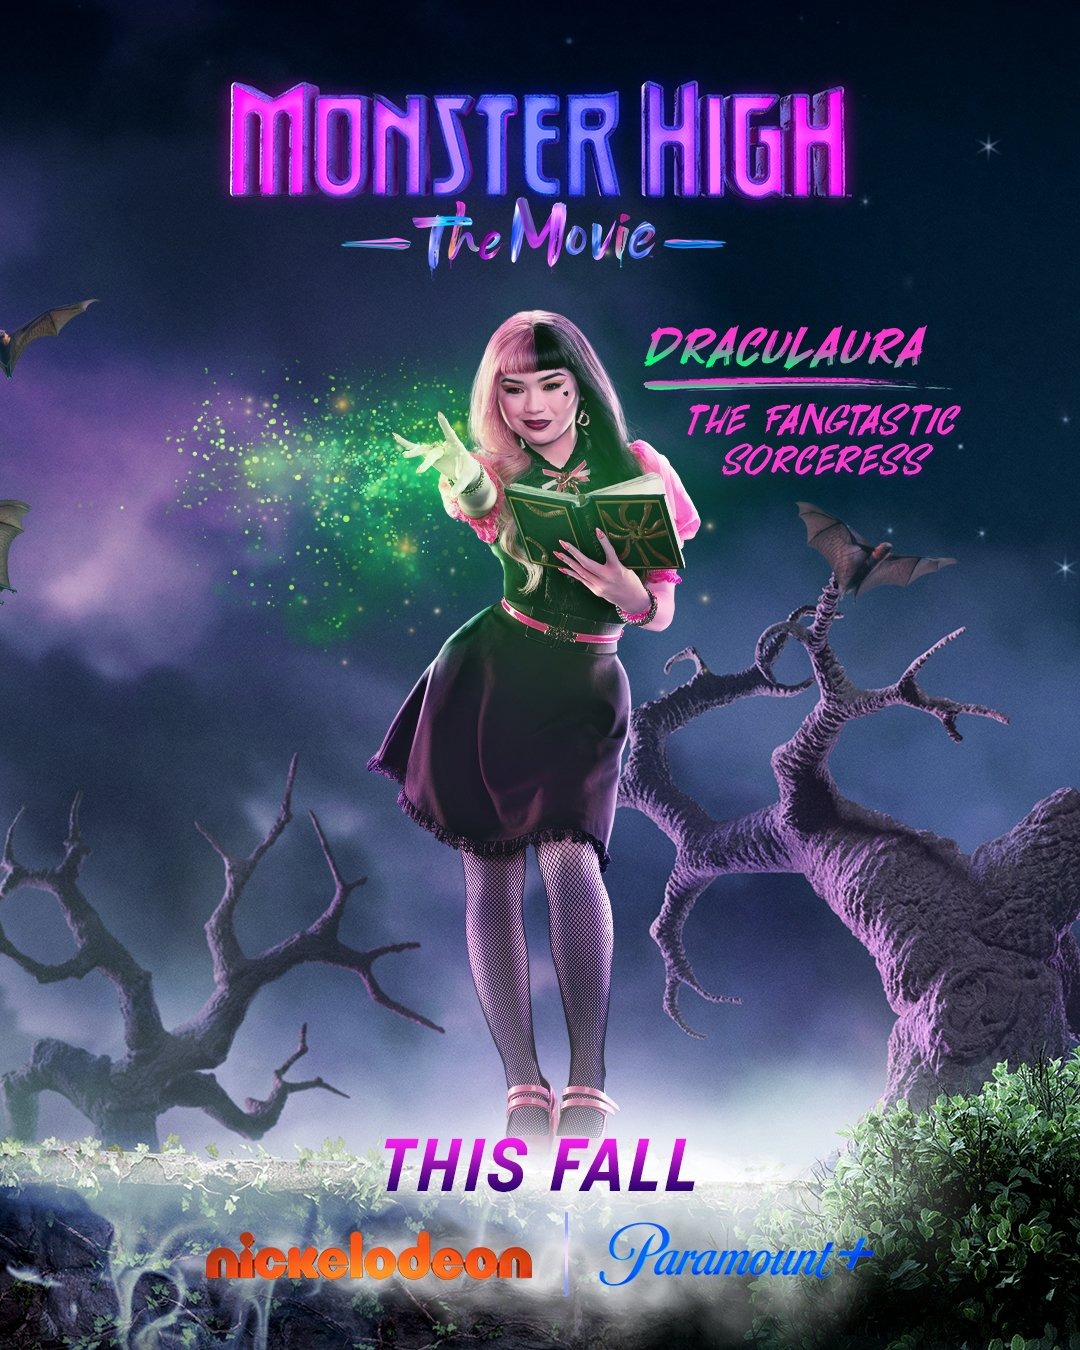 Extra Large TV Poster Image for Monster High: The Movie (#4 of 13)